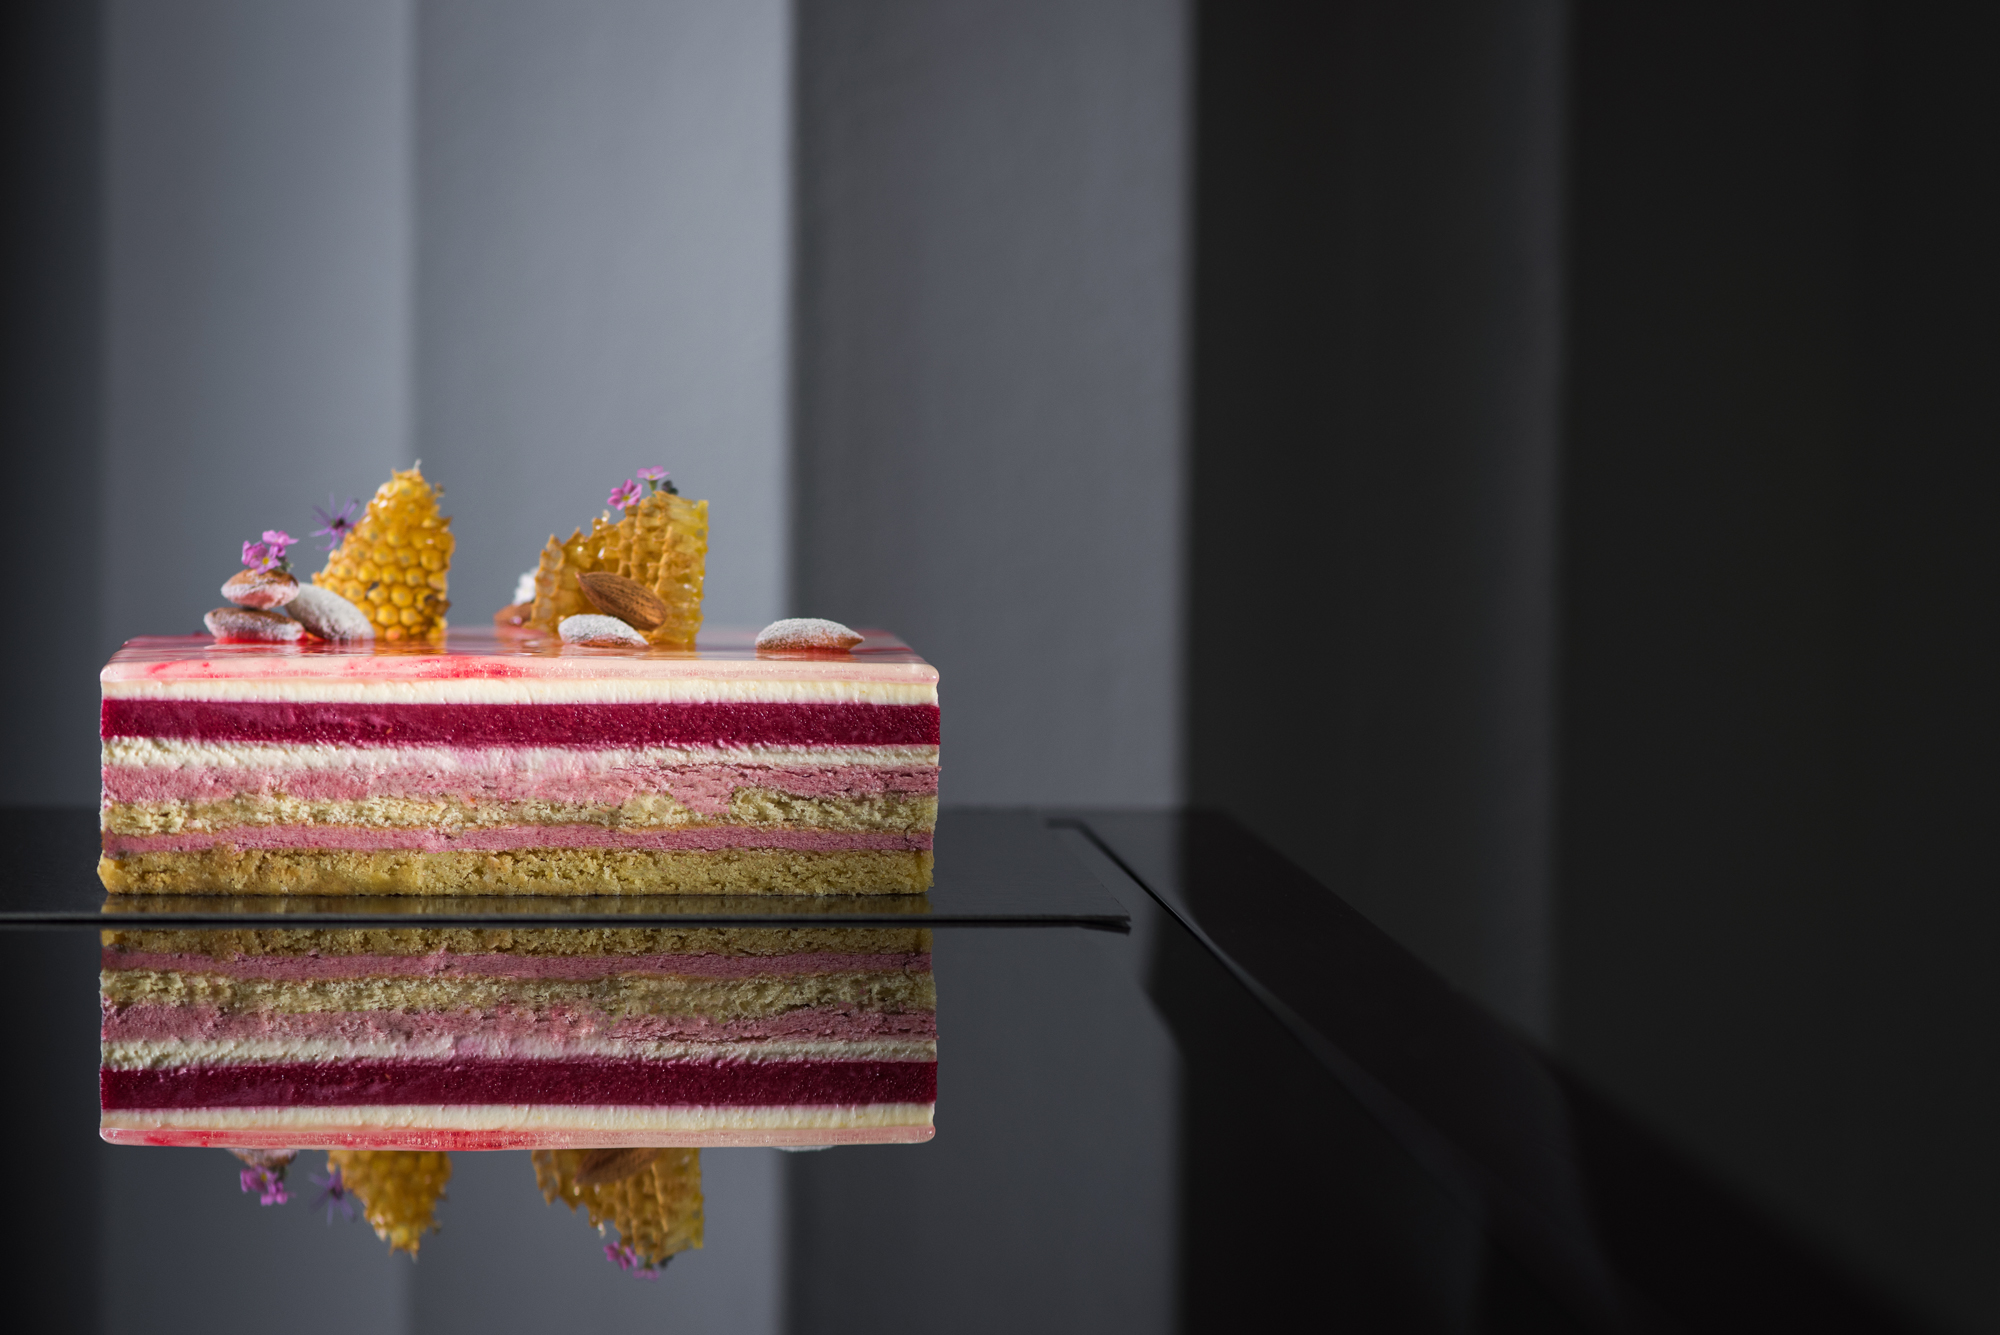 'The Art Of Cake' By The Ritz-Carlton, Budapest